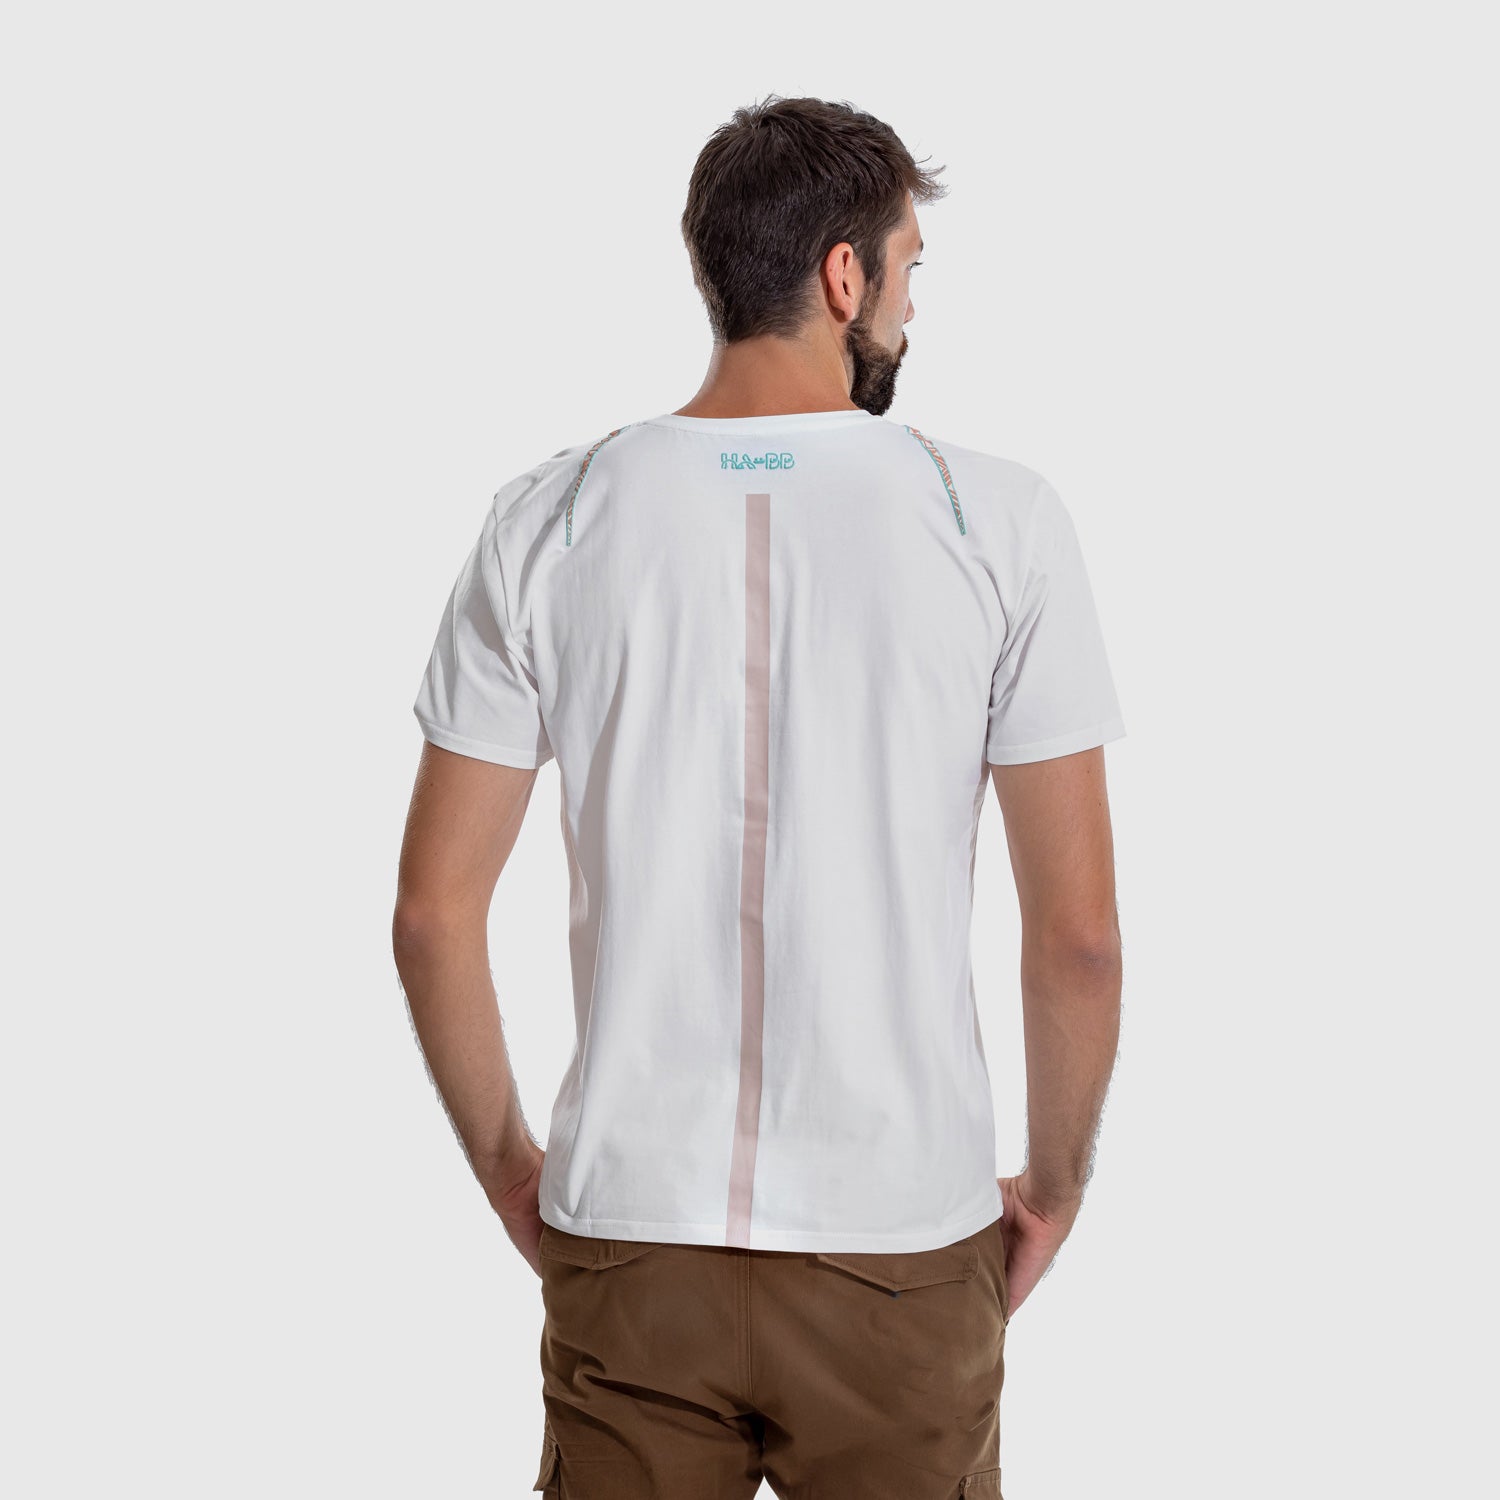 Oryx, Tradition, WWF, white t-shirt, tee, beige print, man, front view, Model Back view